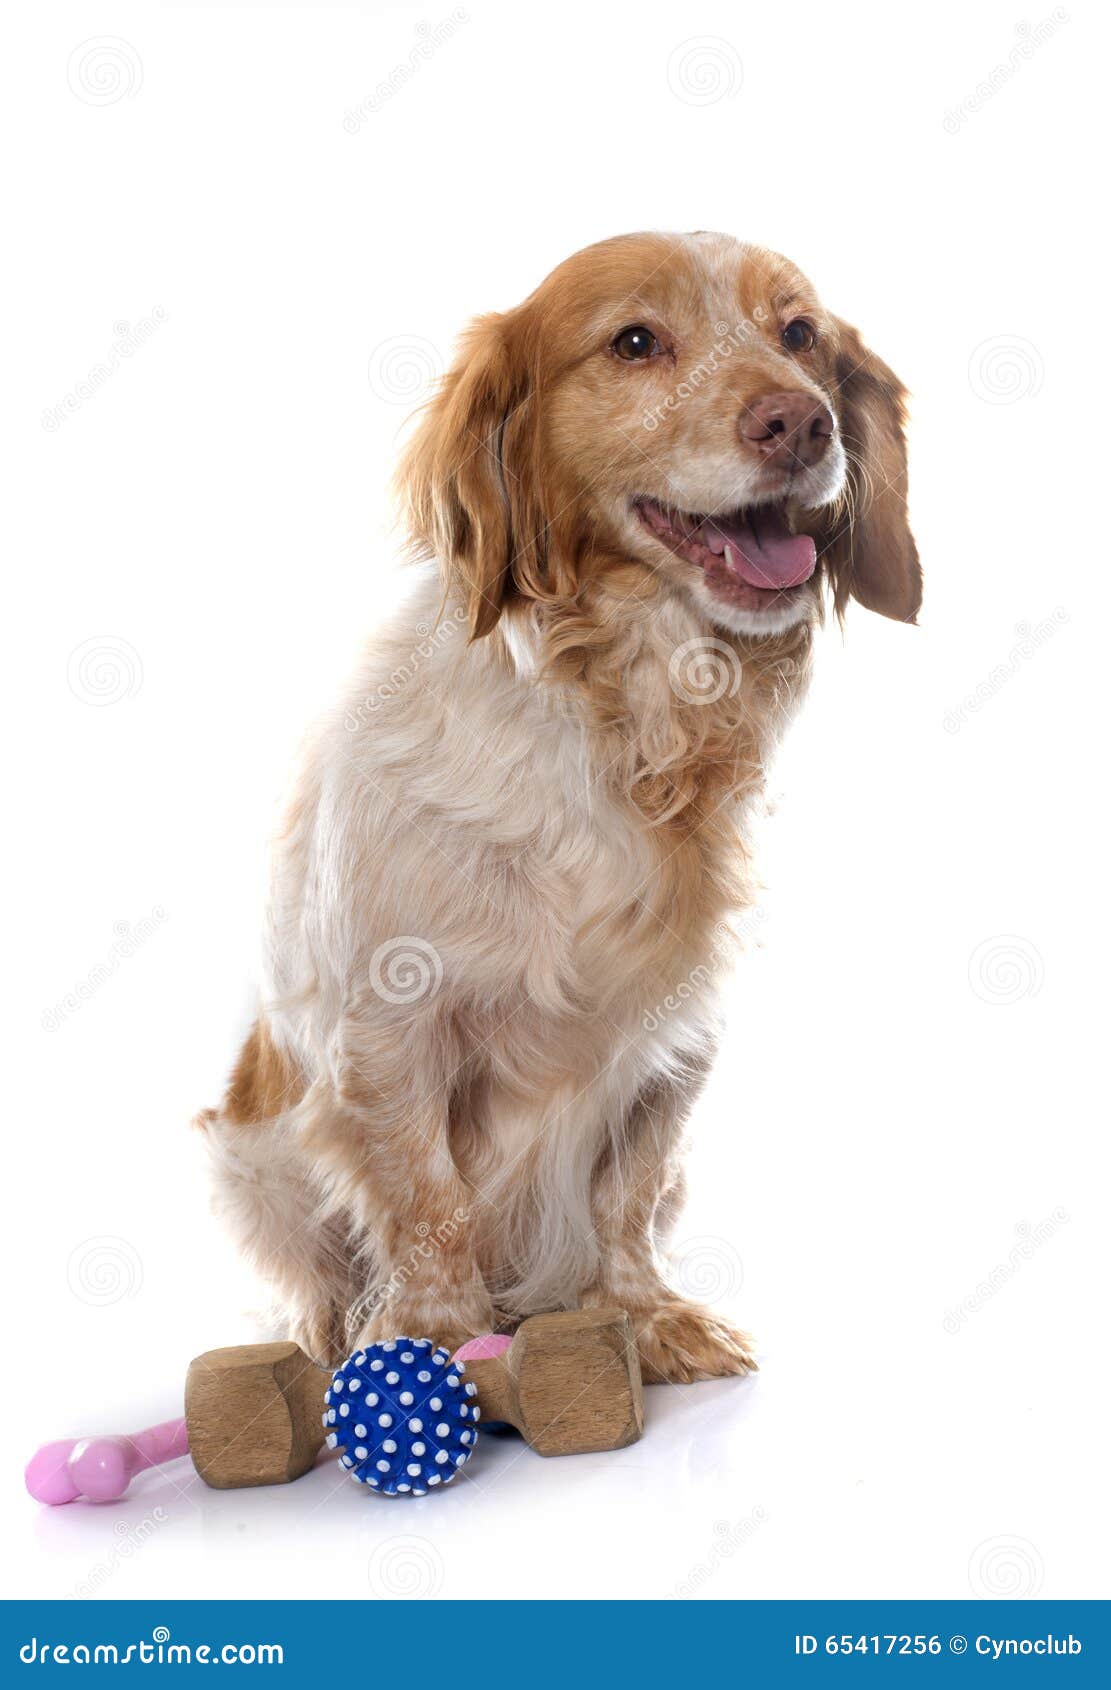 Female Brittany Spaniel. Brittany Spaniel in front of white background